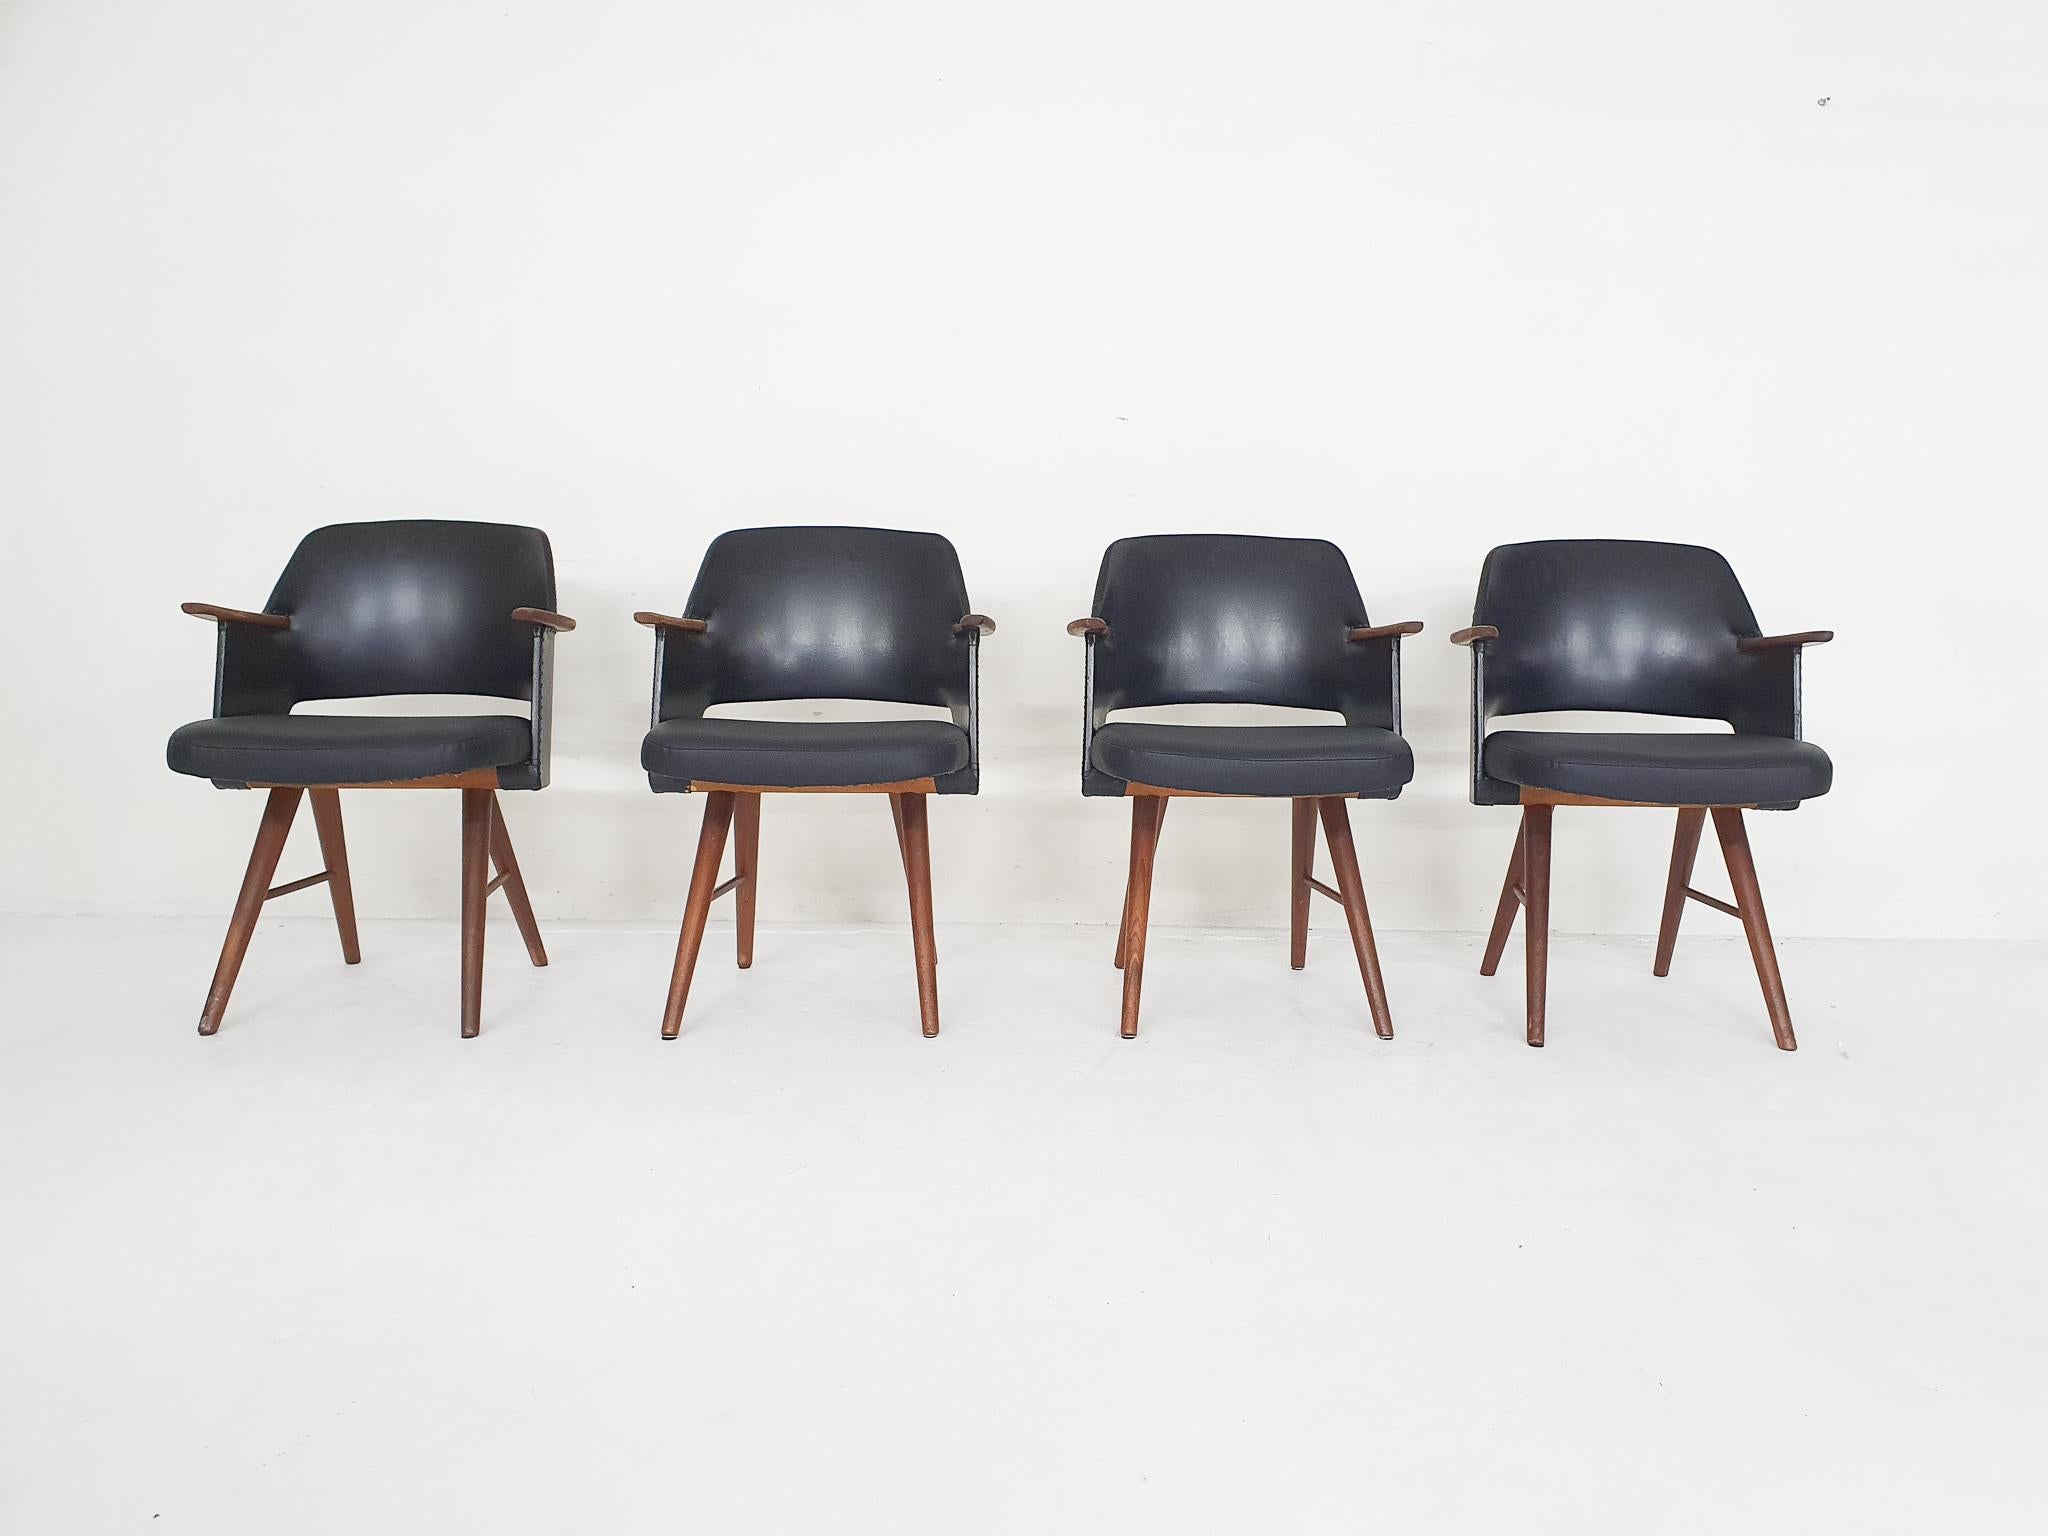 Teak dining chairs with black faux-leather upholstery. The seating has been reupholstered in black vinyl. The back has the original black vinyl upholstery.
One leg has a repair at the foot.

Chairs are marked at the bottom

Height of the arm rests